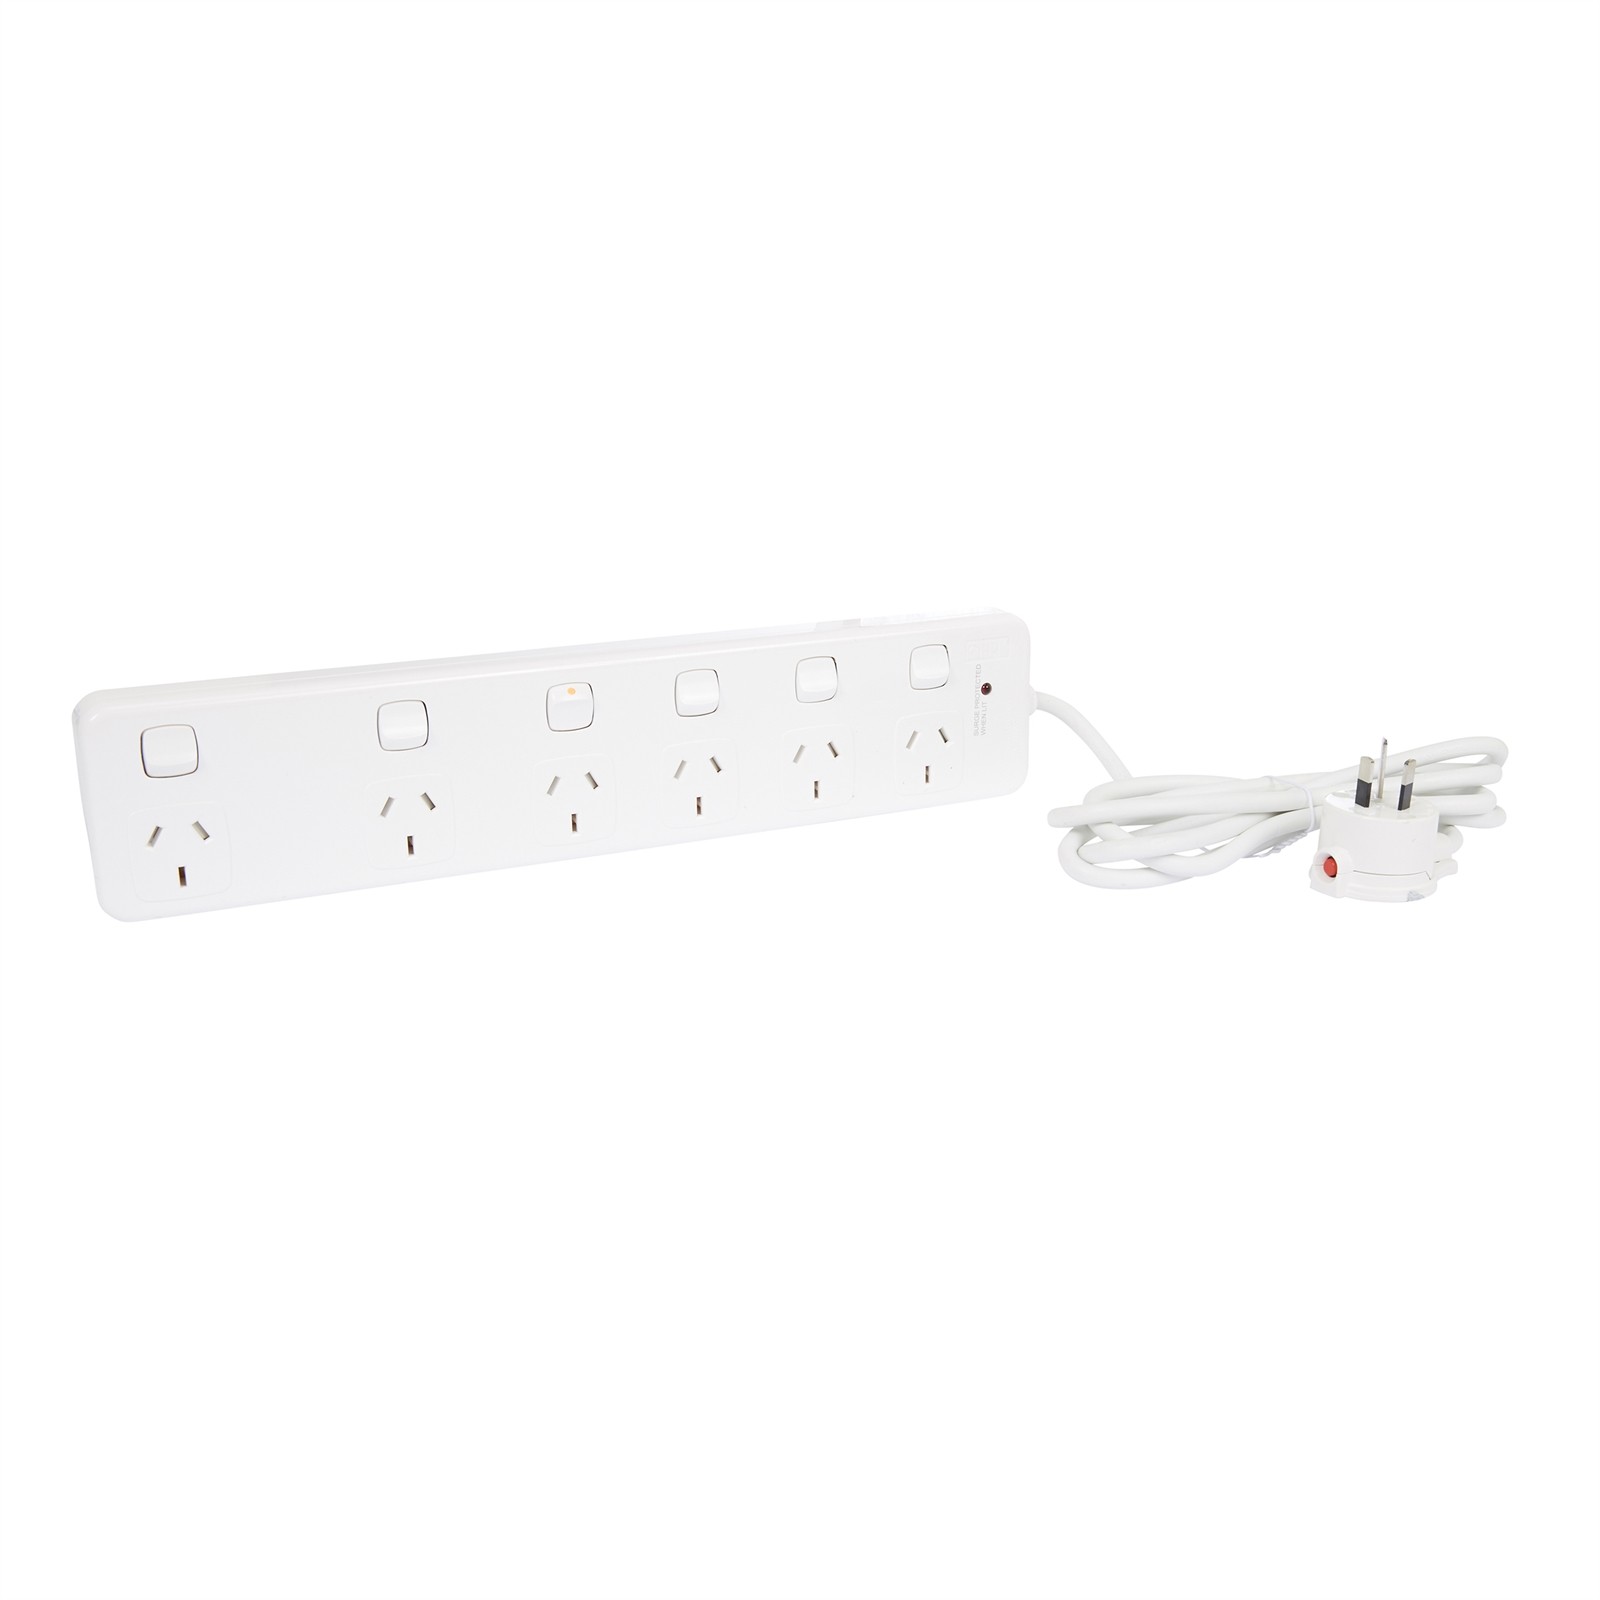 HPM 6 OUTLET SURGE PROTECTED POWERBOARD